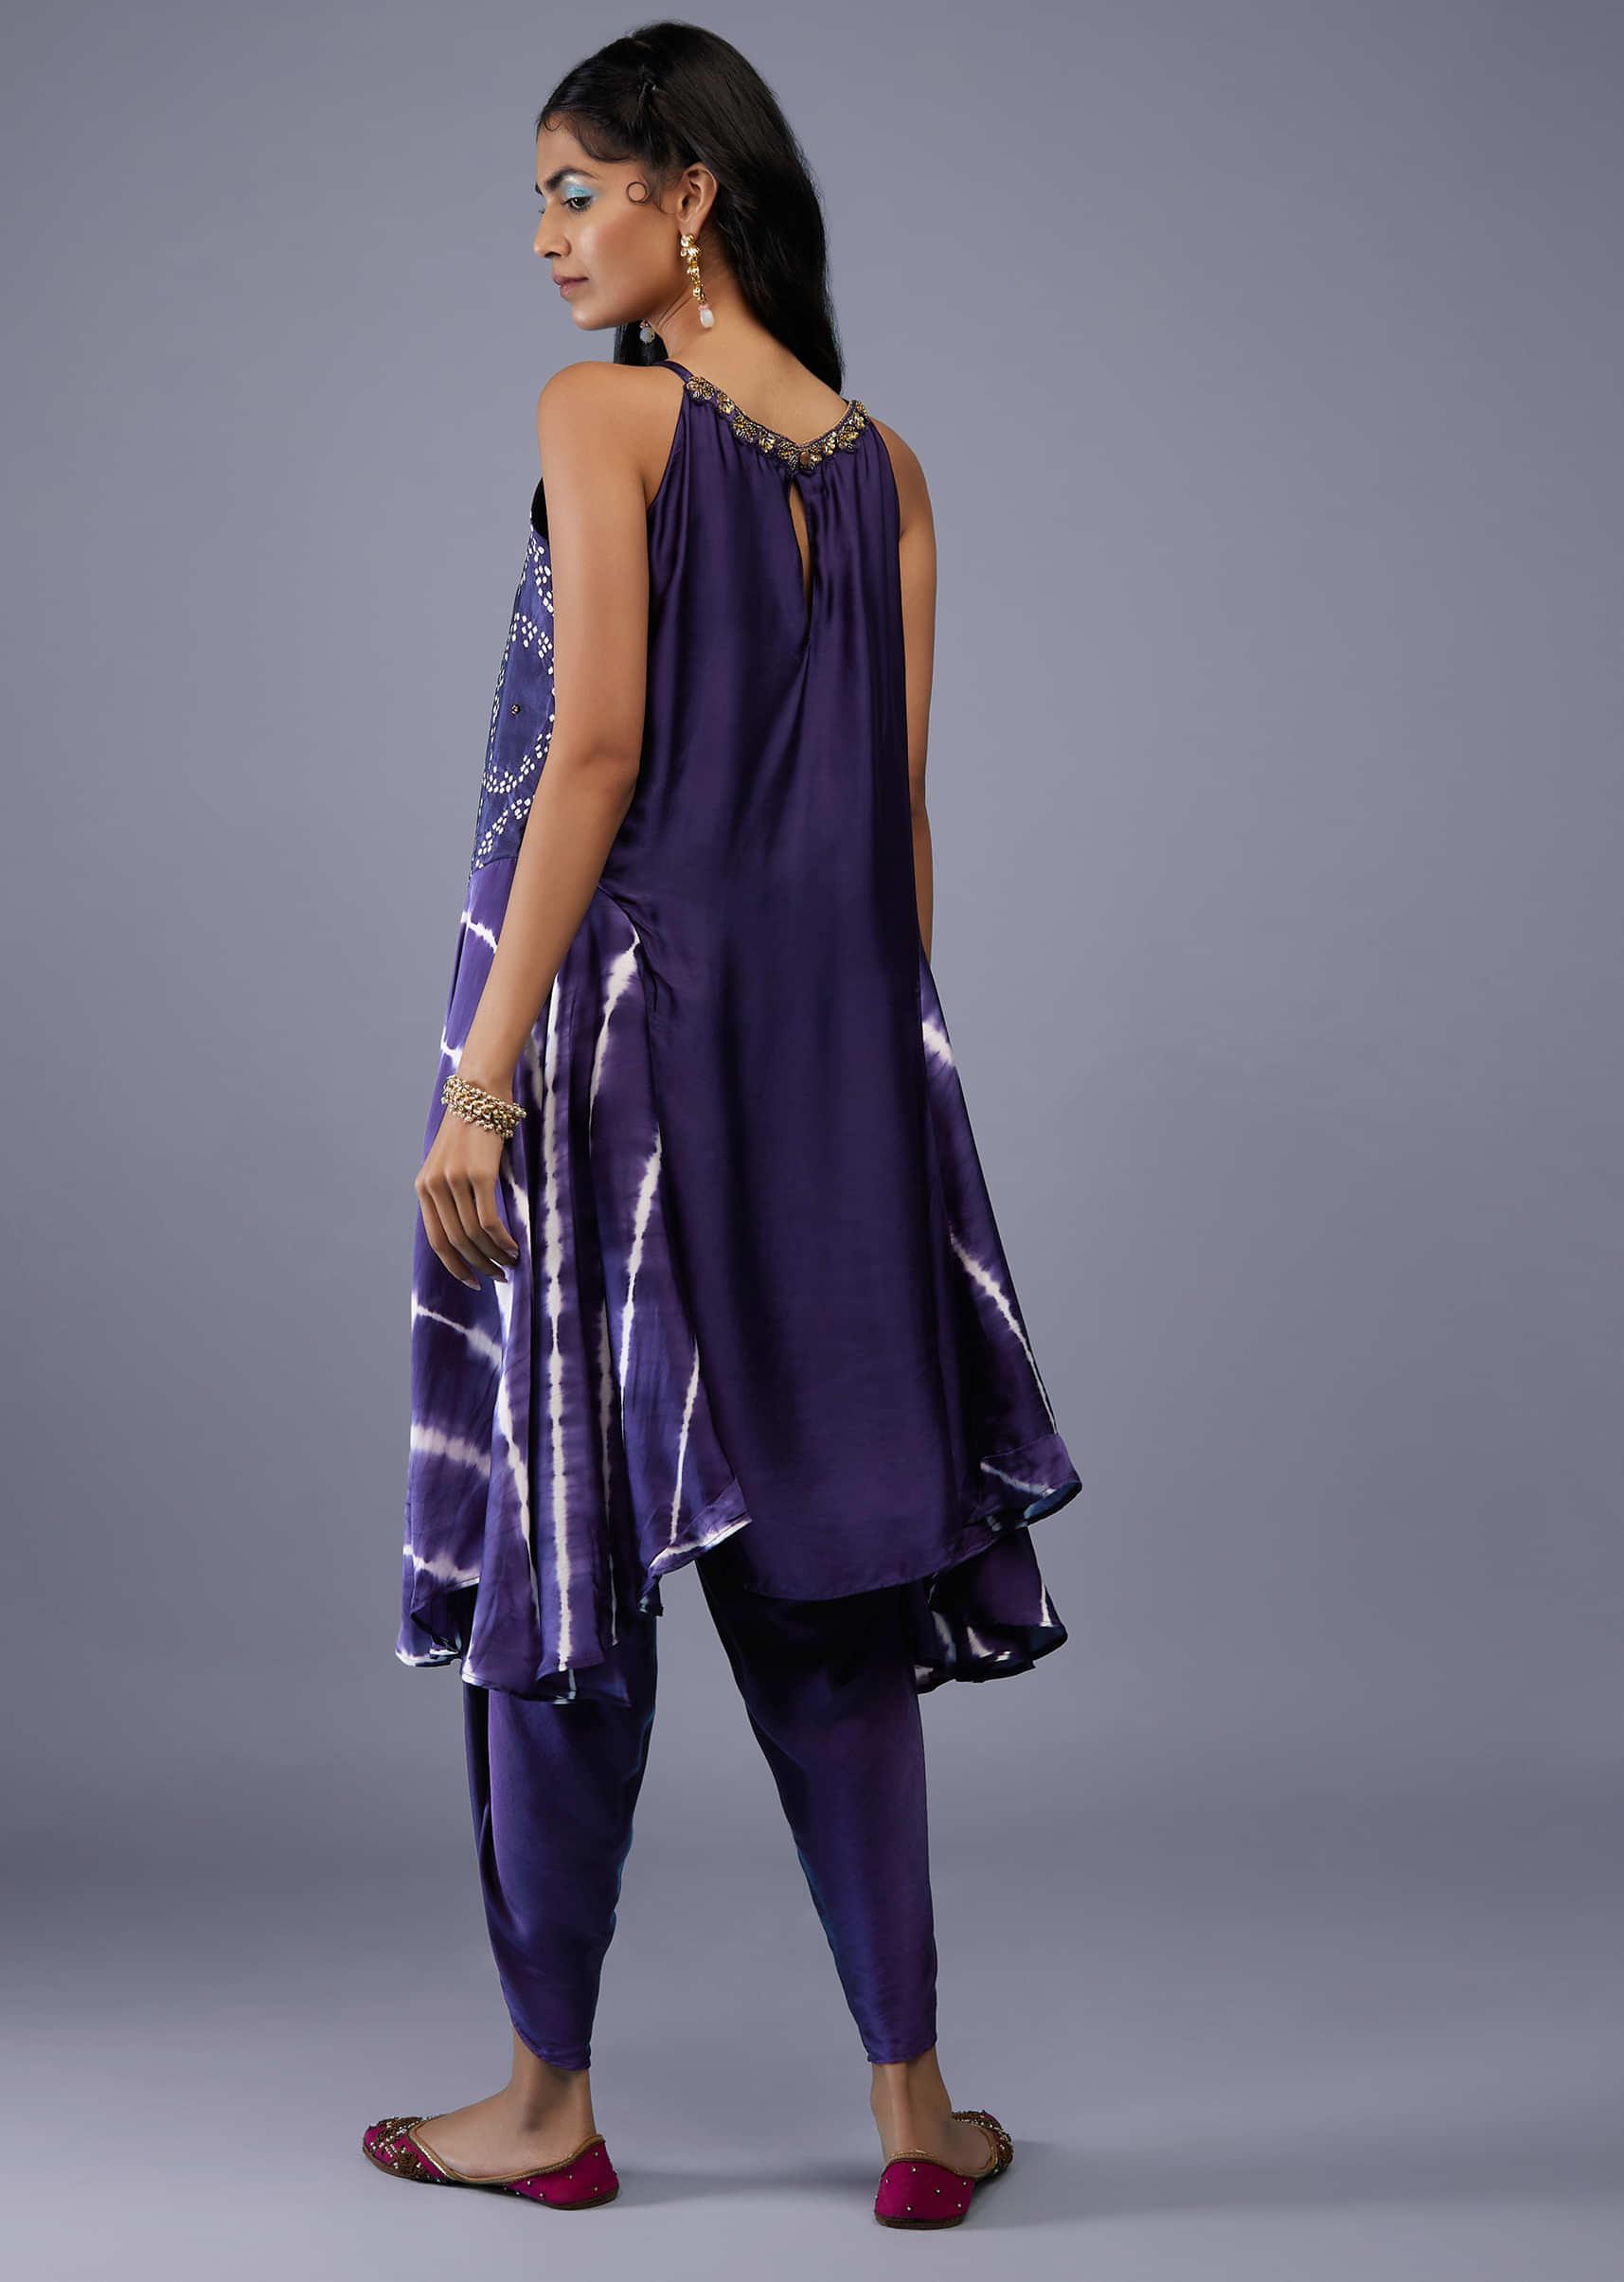 Midnight Blue Silk Bandhani Top With Tie-Dye Side Panel And Silk Dhoti Pants